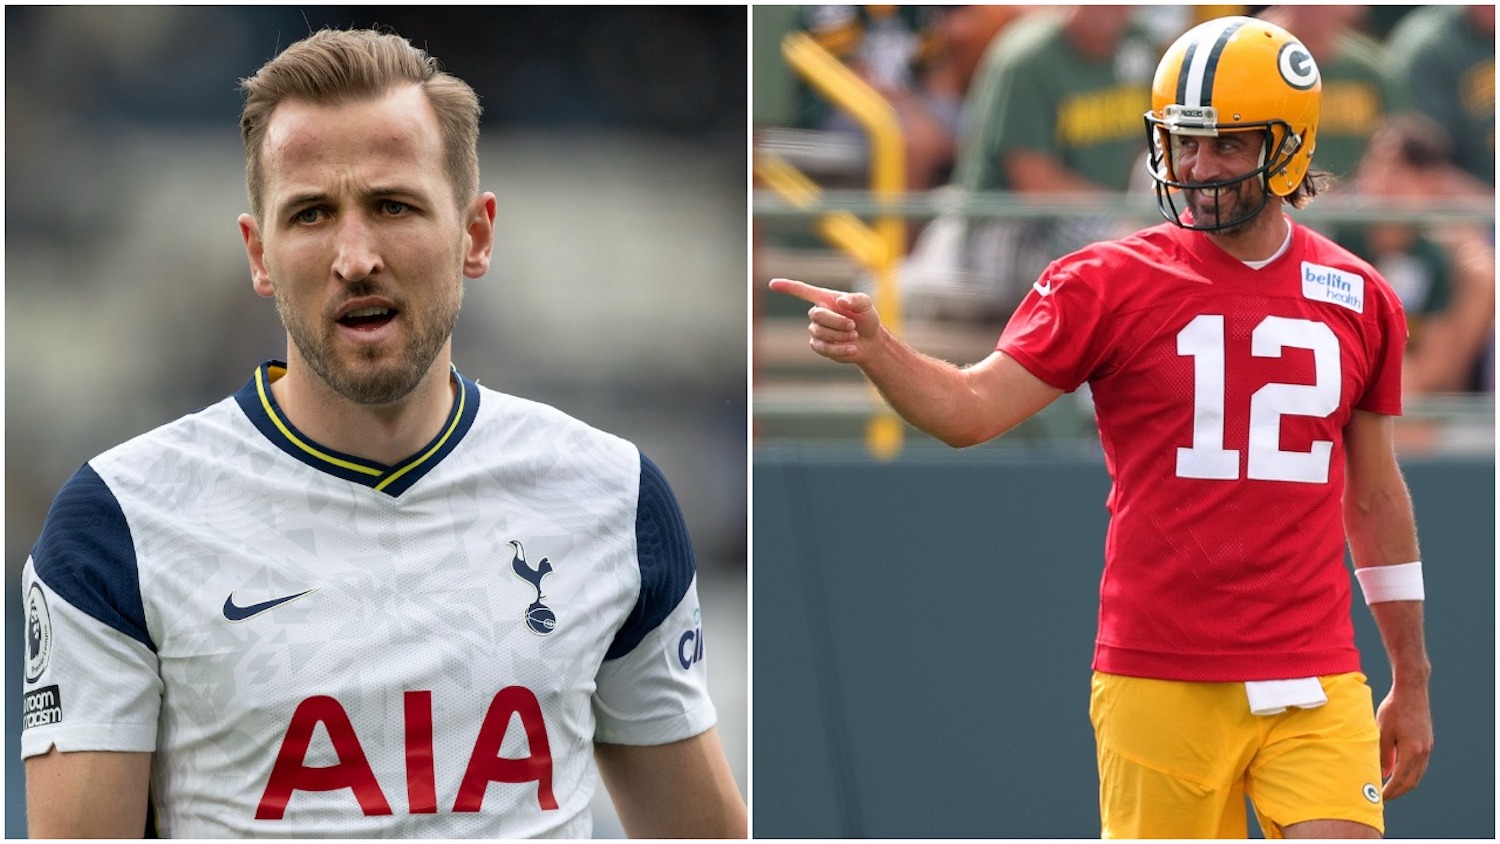 Harry Kane (L) and Aaron Rodgers (R) both faced contract issues during summer 2021.